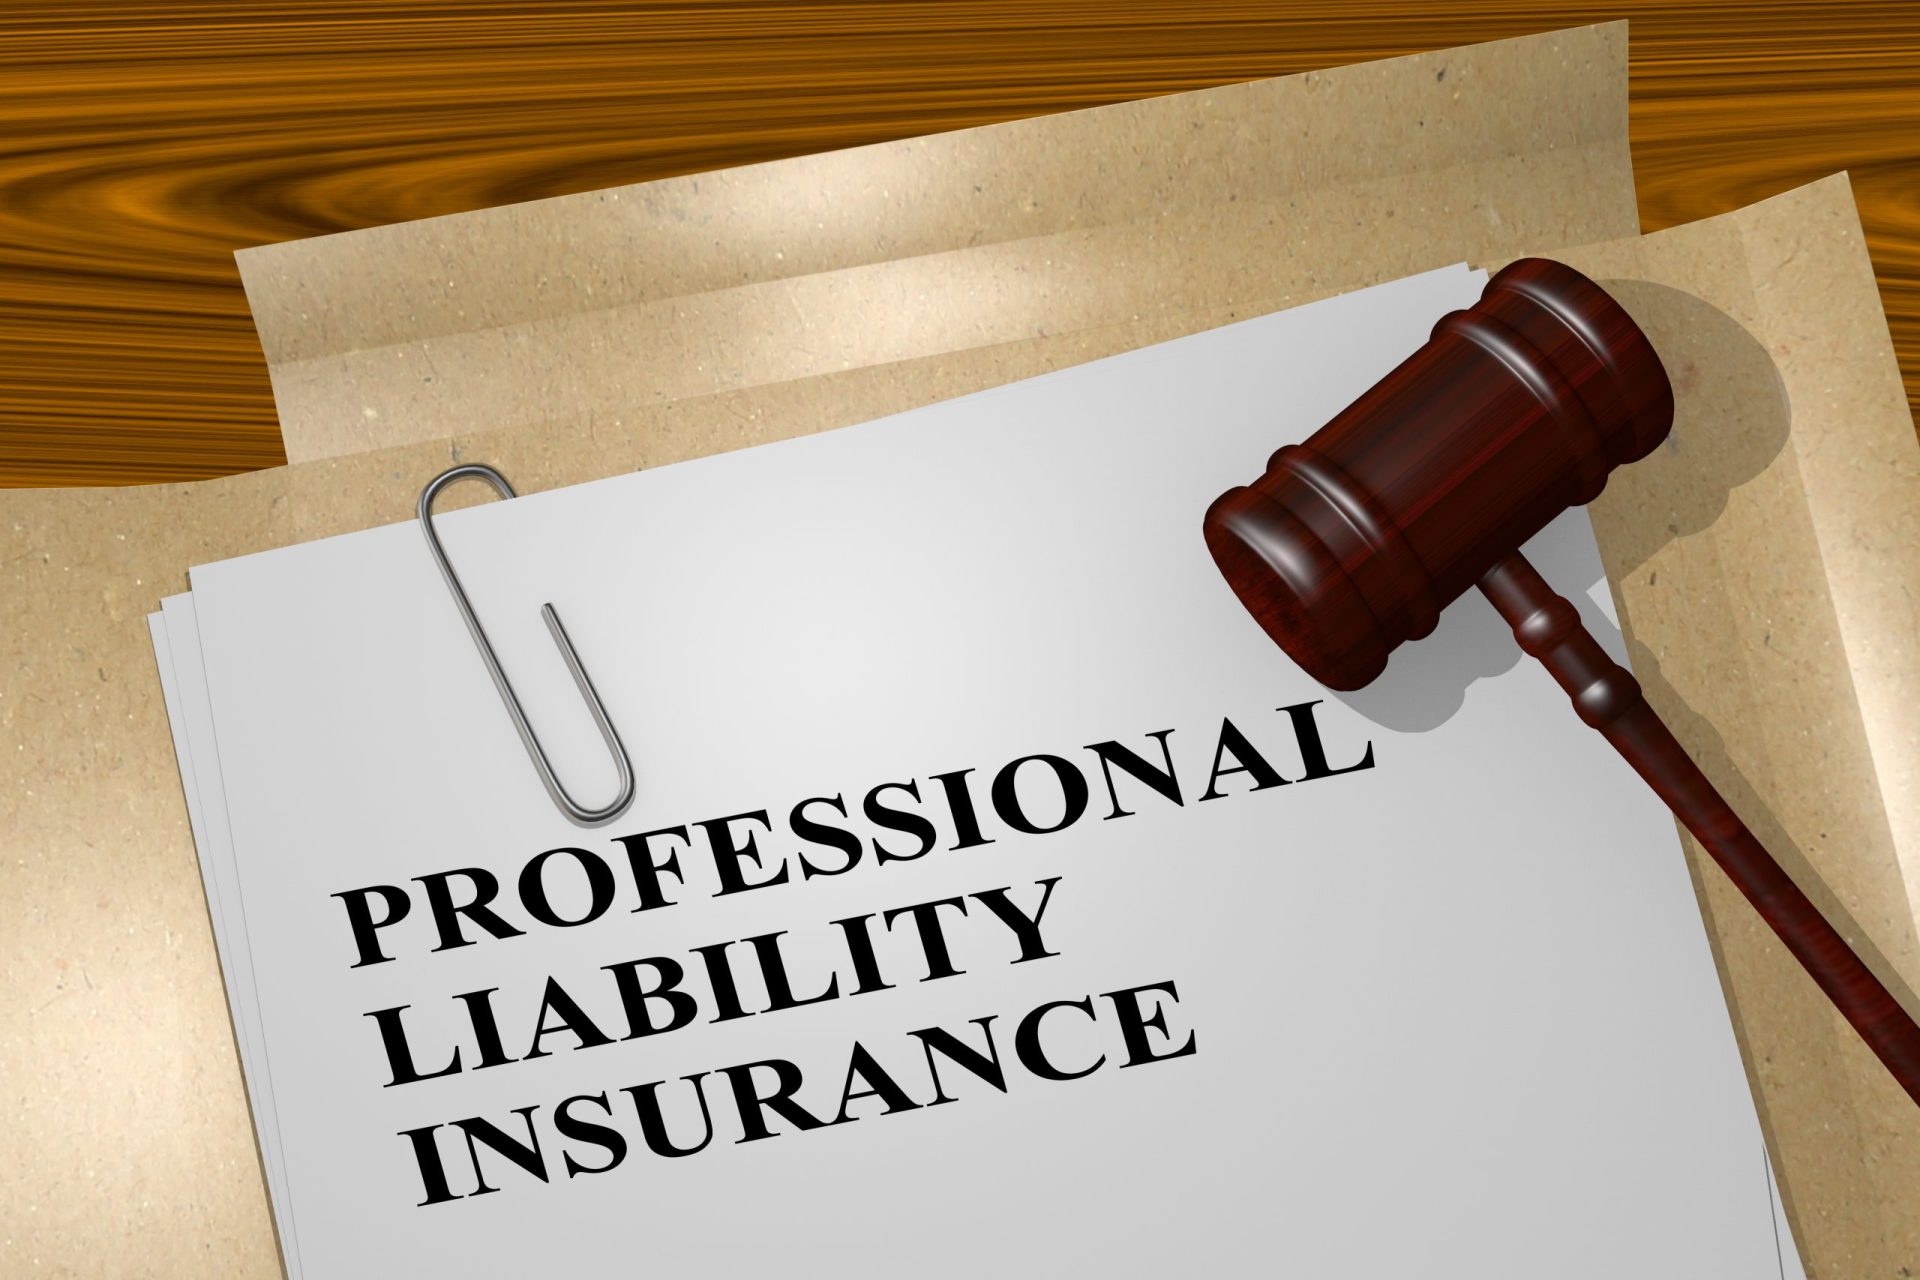 E&O Insurance Michigan: Protect Your Business with Professional Liability Coverage